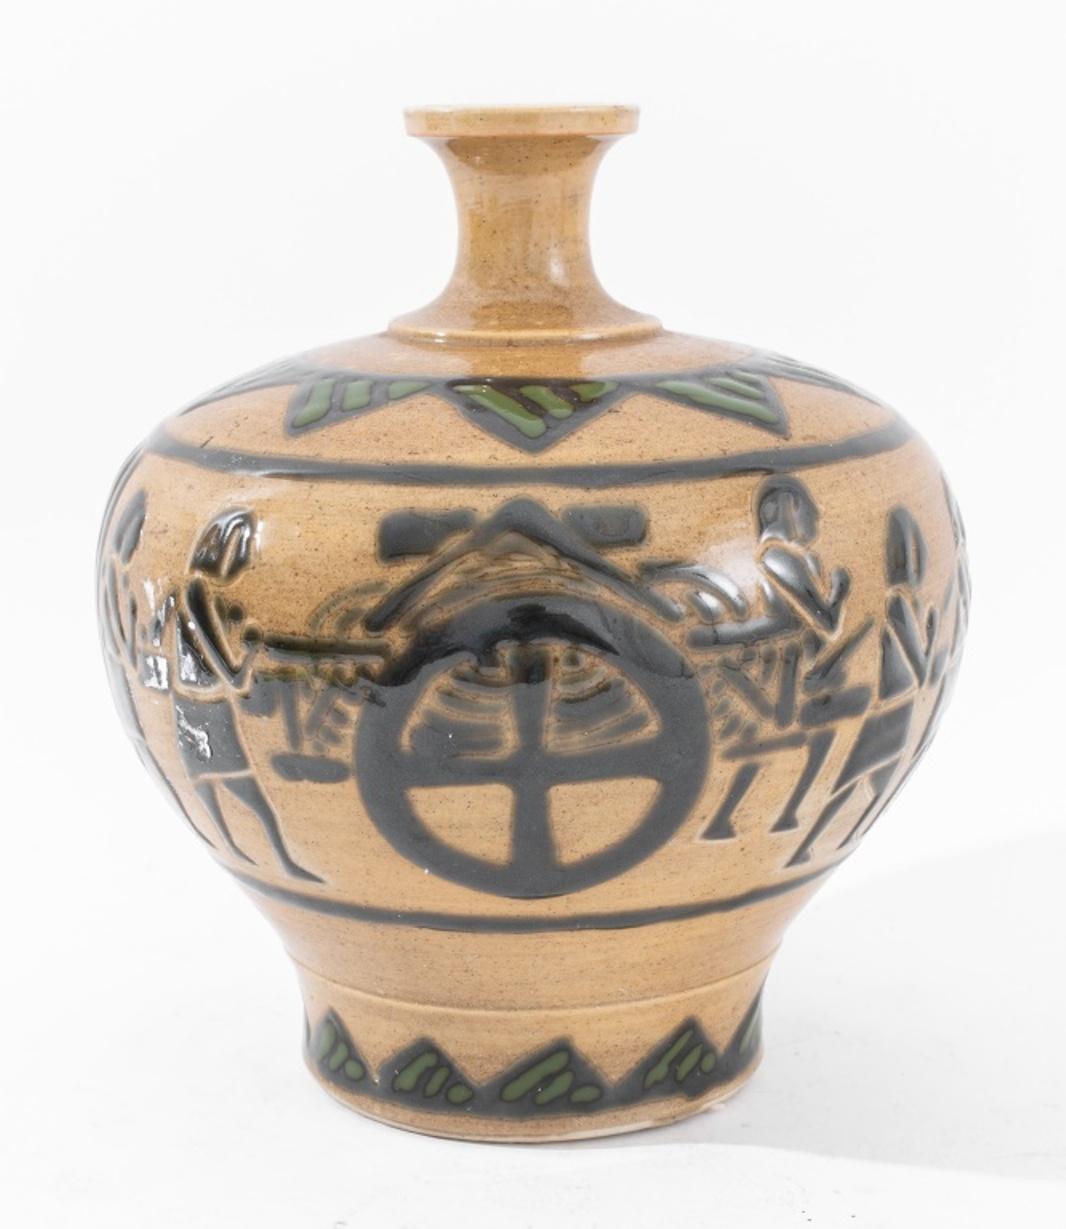 Contemporary Egyptian Revival Ceramic Vase, 1940s For Sale